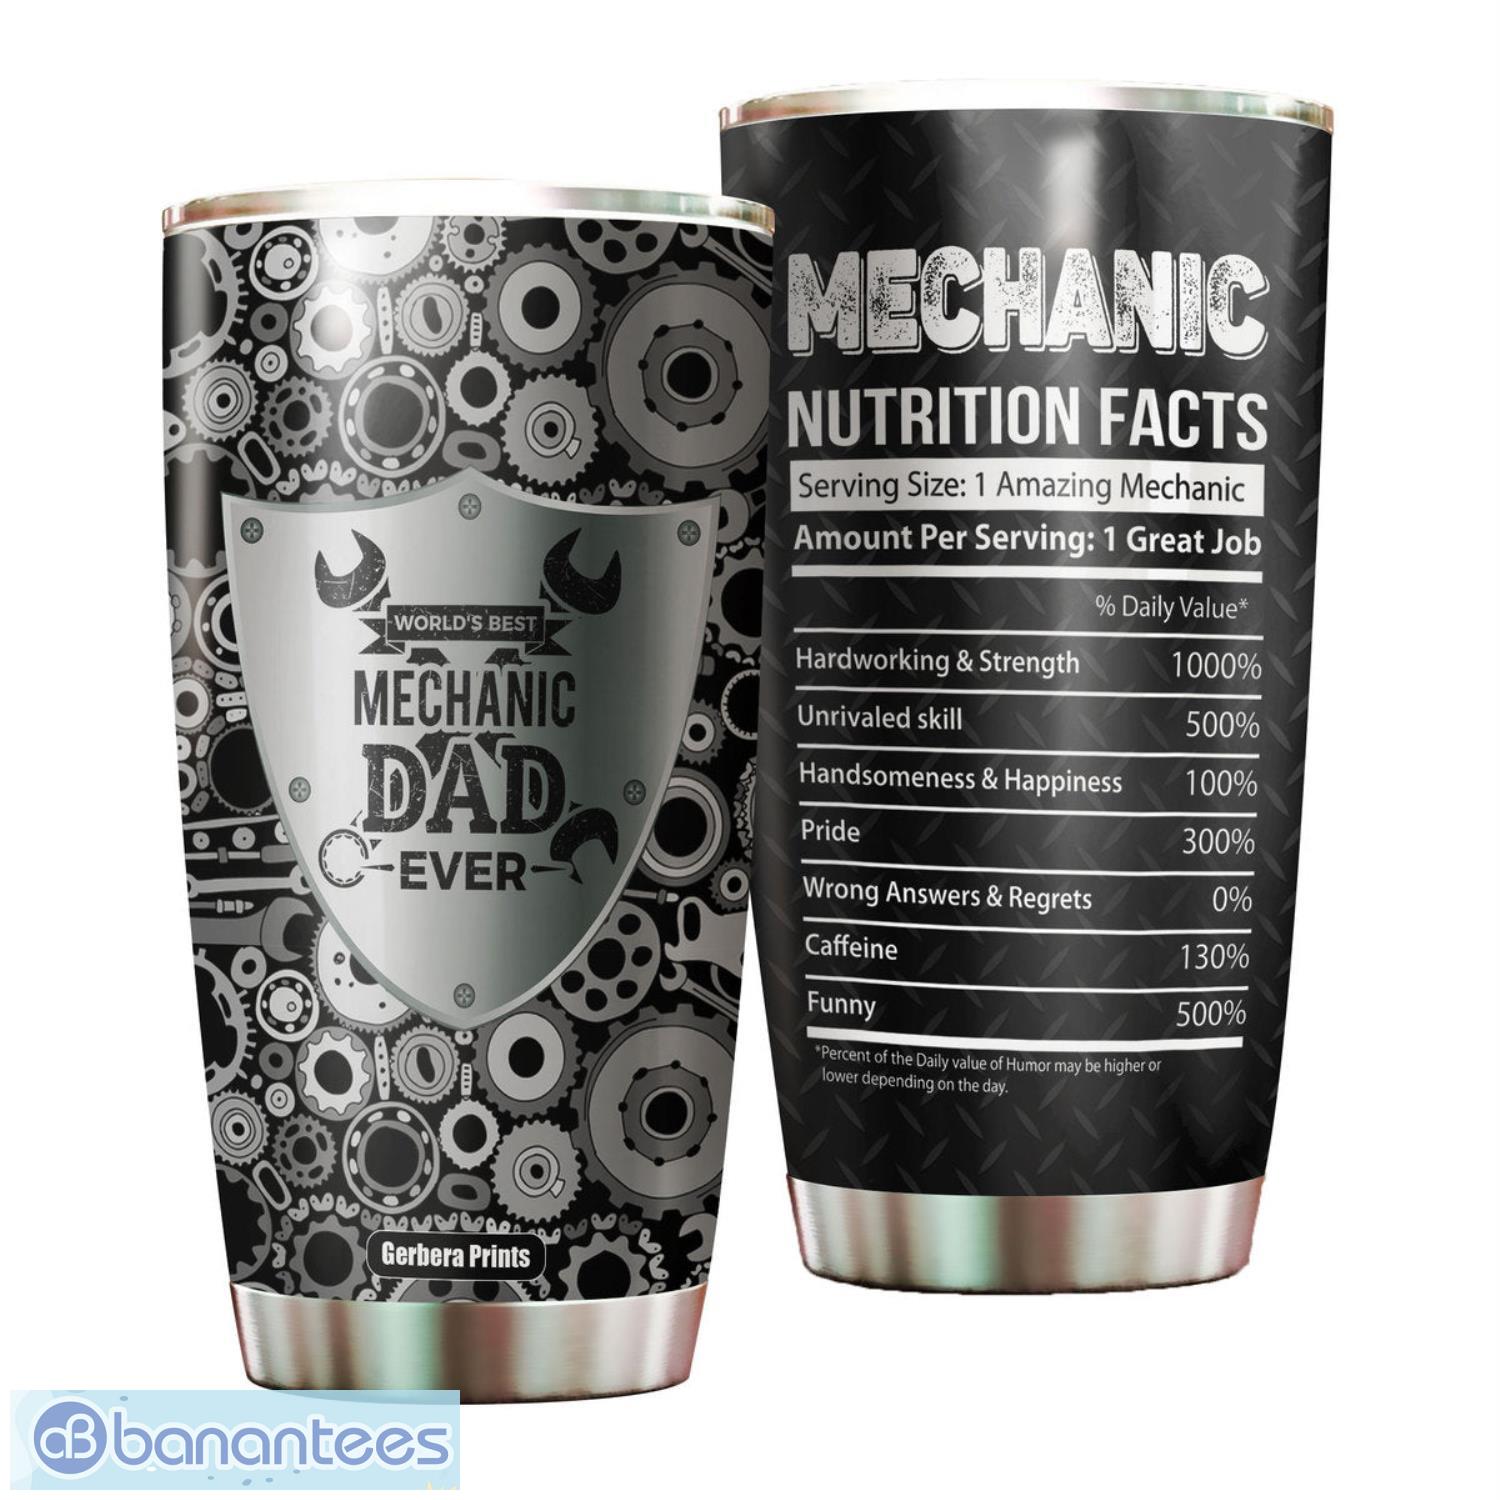 https://image.banantees.com/2023/05/best-mechanic-dad-ever-nutrition-fact-fathers-day-stainless-steel-tumbler-gift-for-dad.jpg